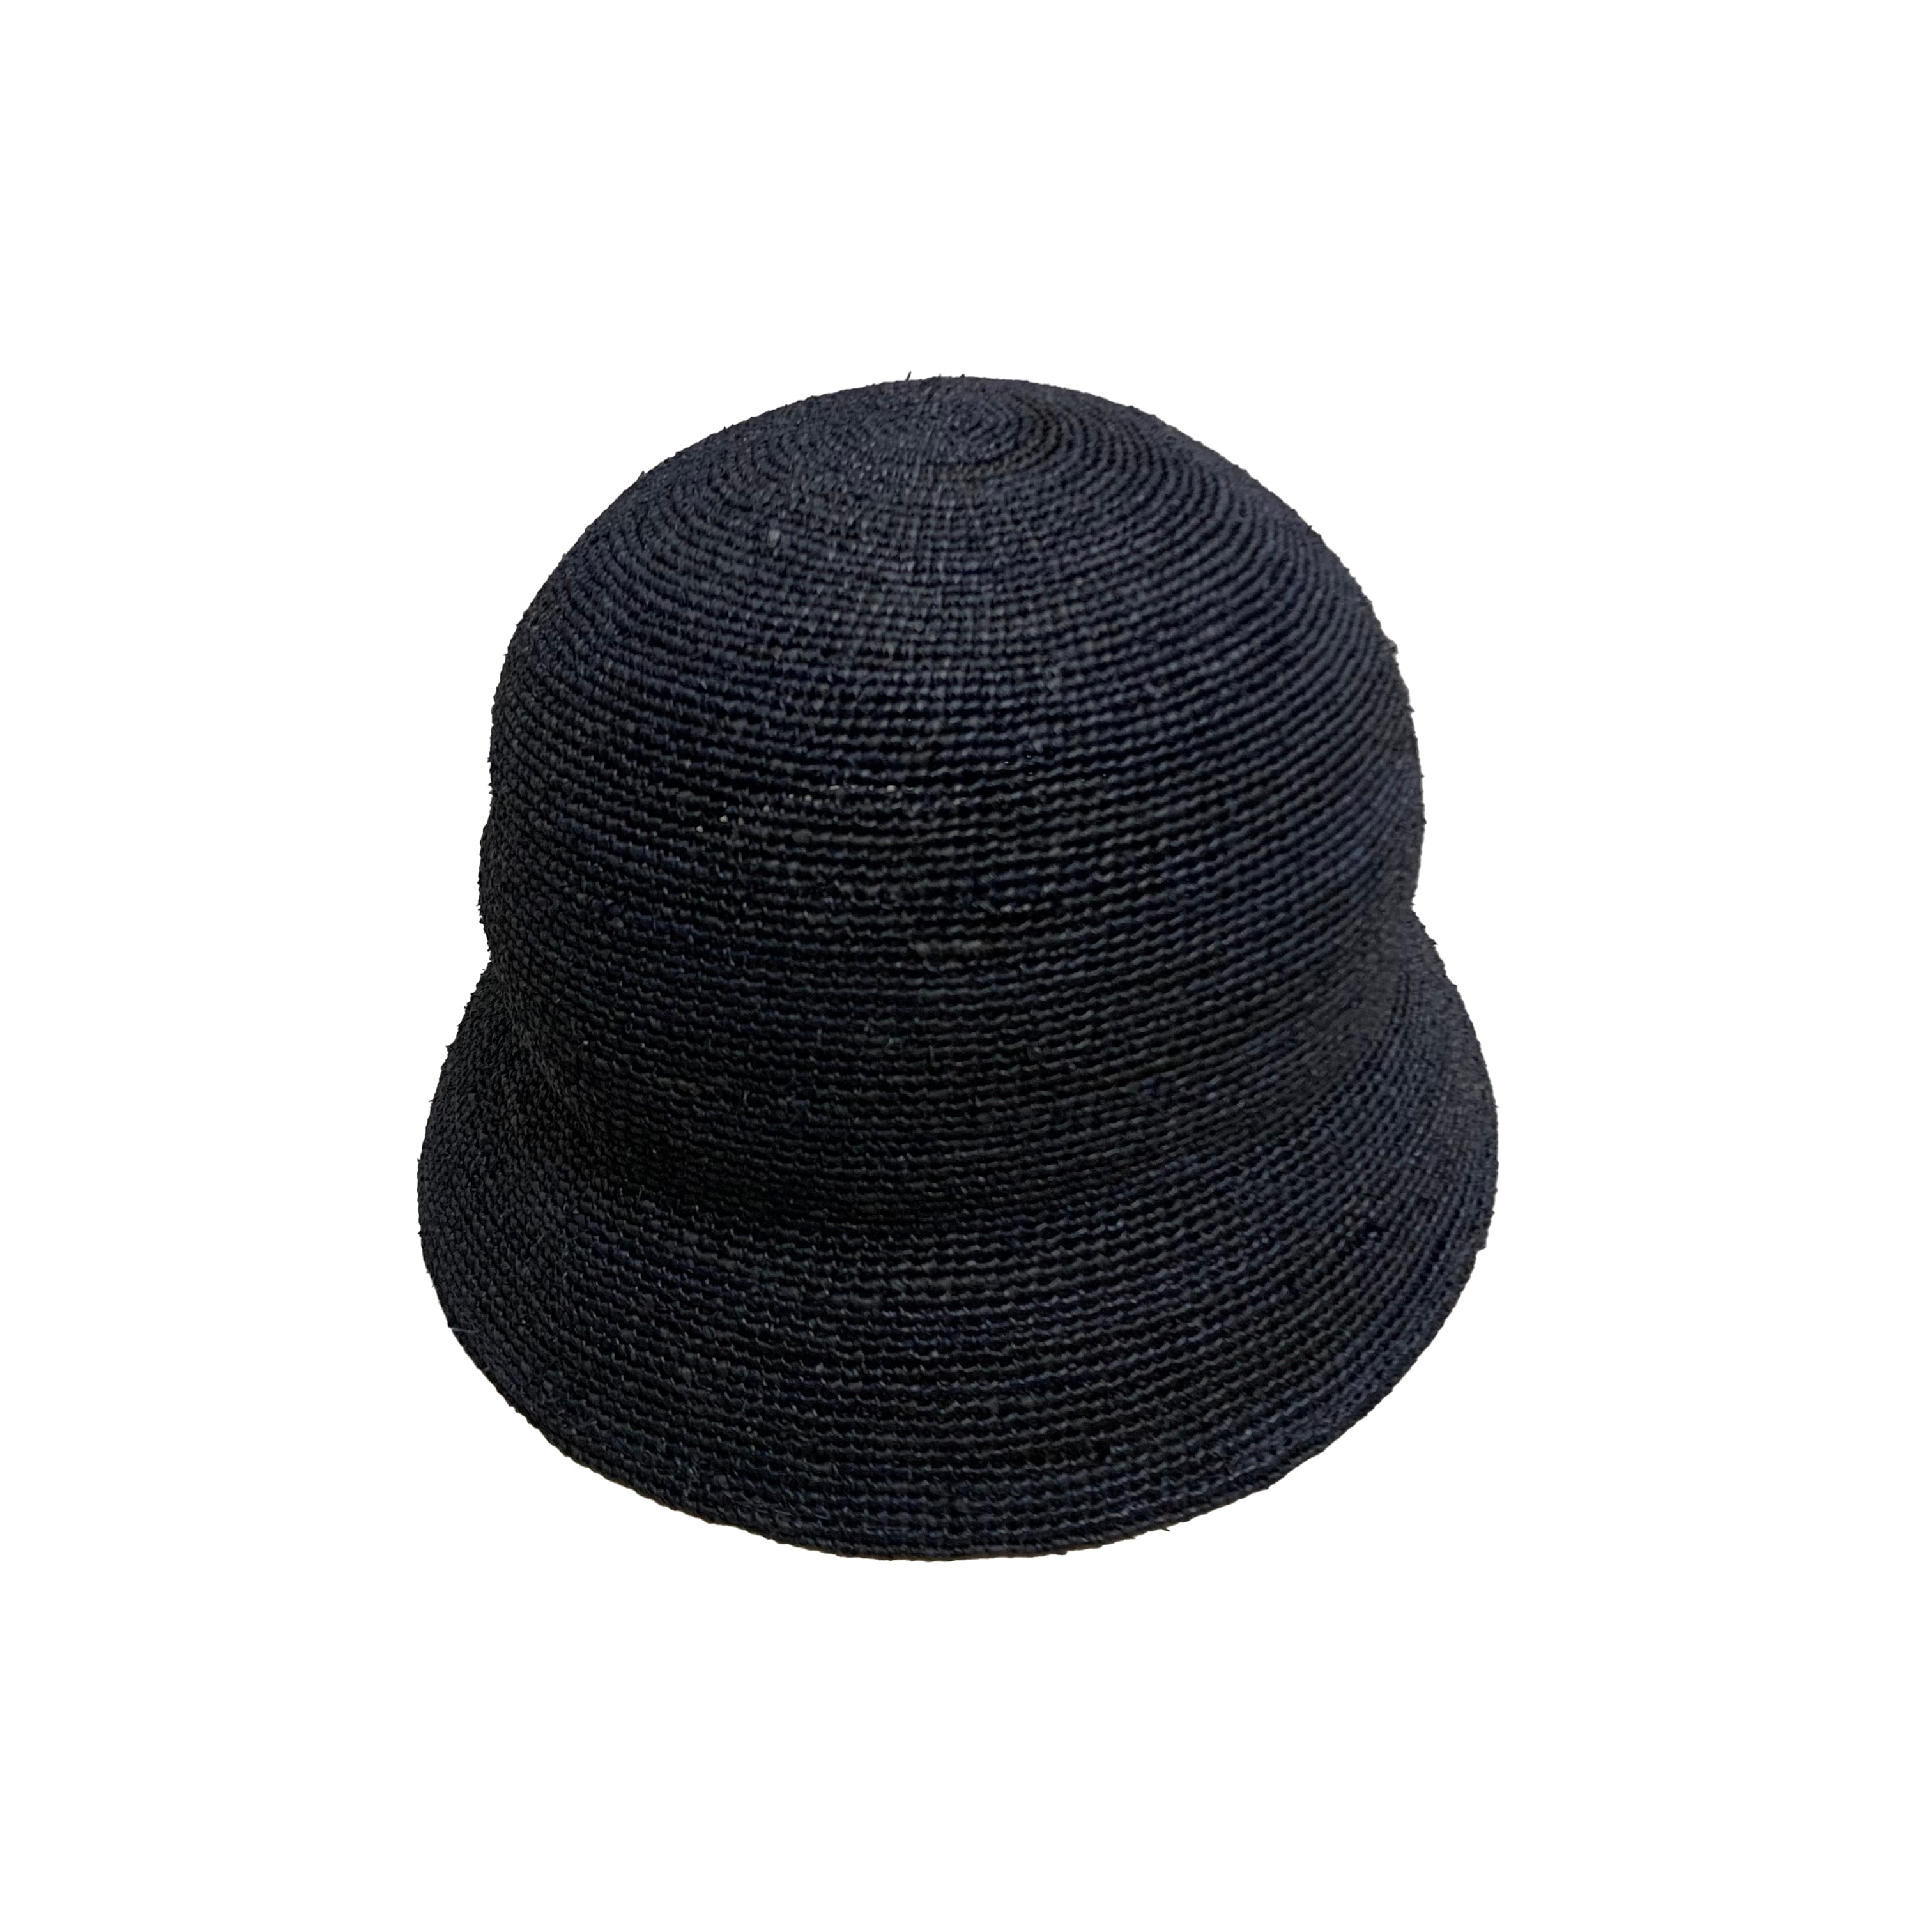 NOROLL / DETOURS RAFFIA HAT -NAVY- | THE NEWAGE CLUB powered by BASE